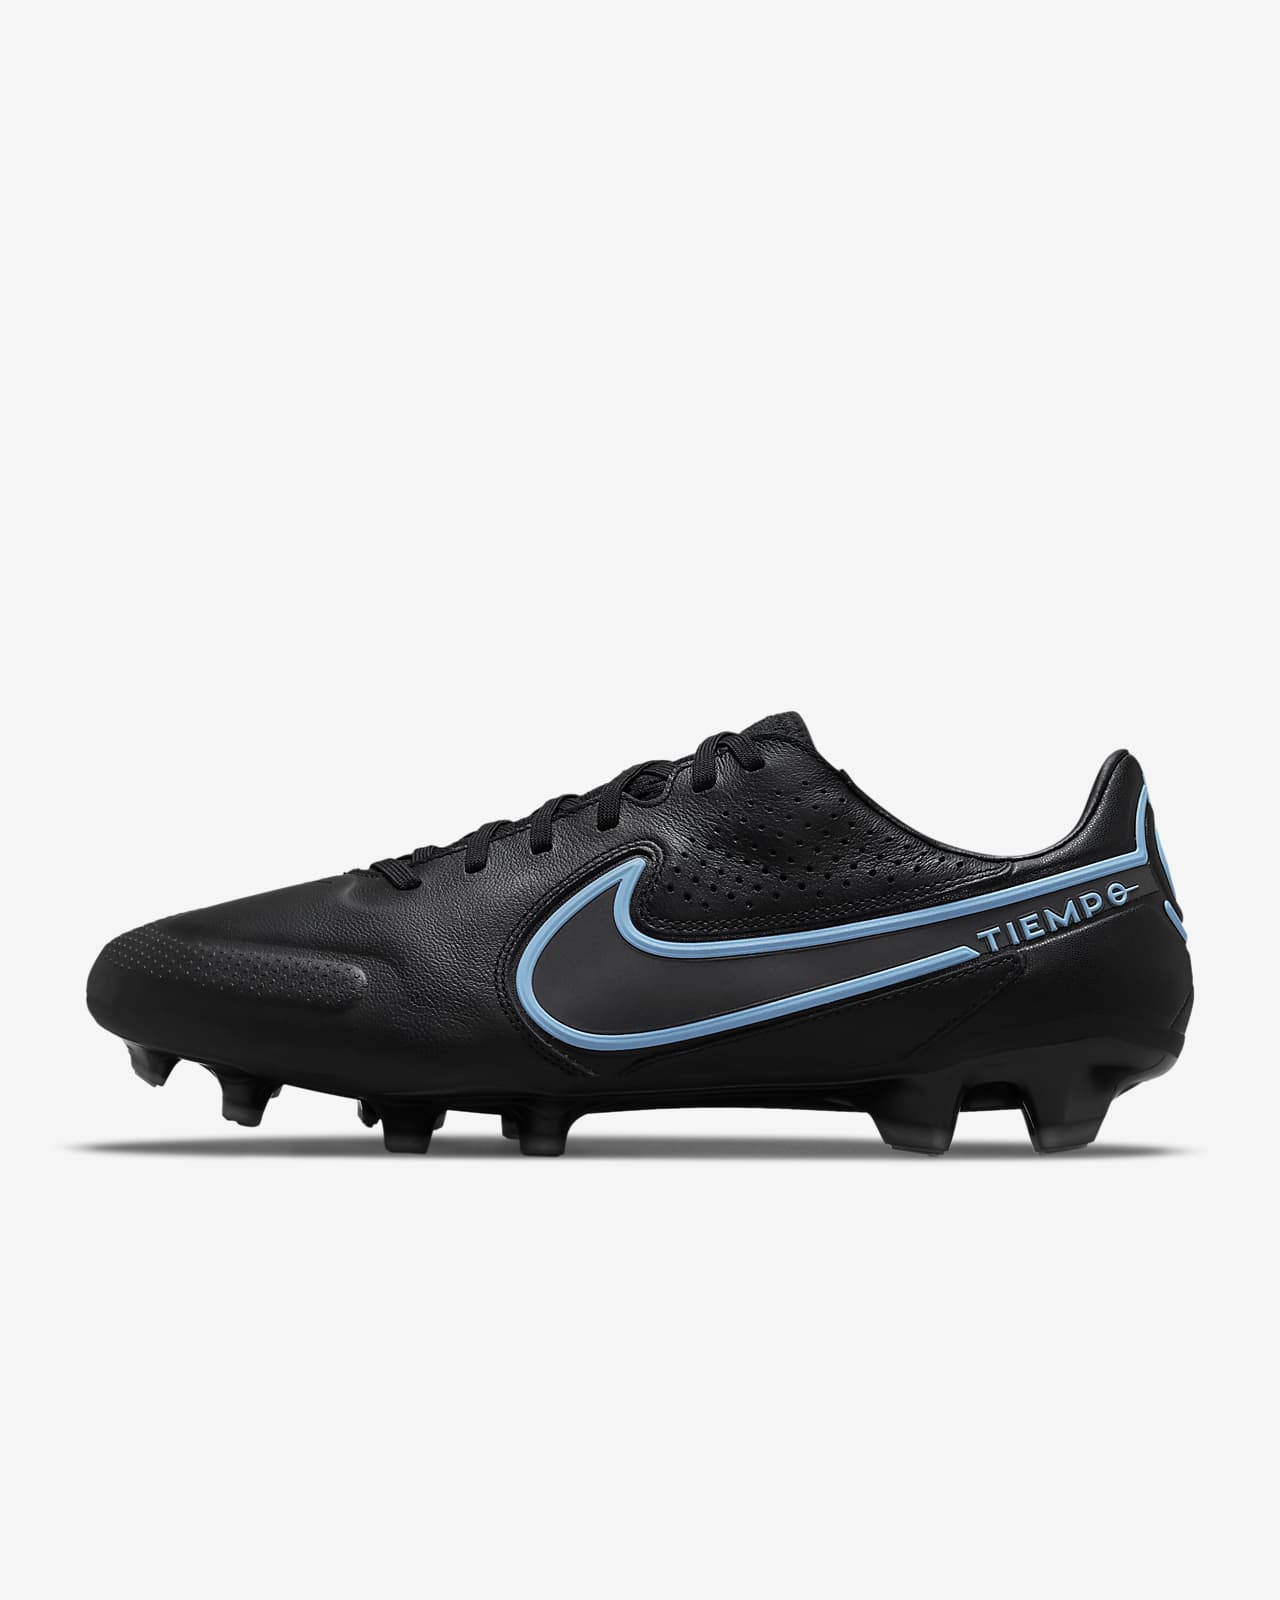 Nike Tiempo Legend 9 Pro FG Firm-Ground Football Boot